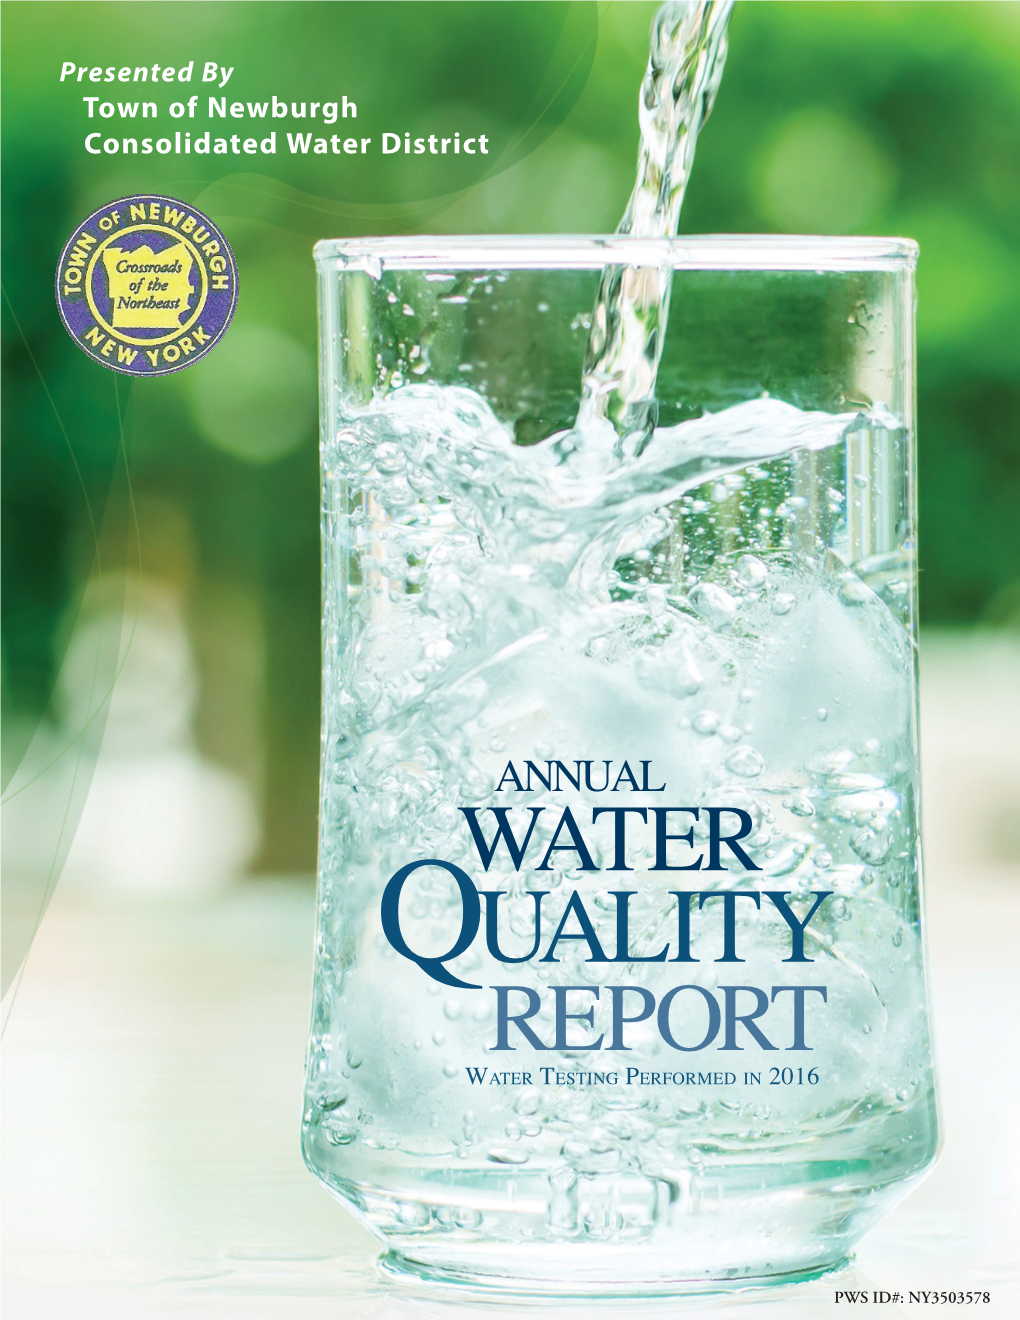 Quality REPORT Water Testing Performed in 2016